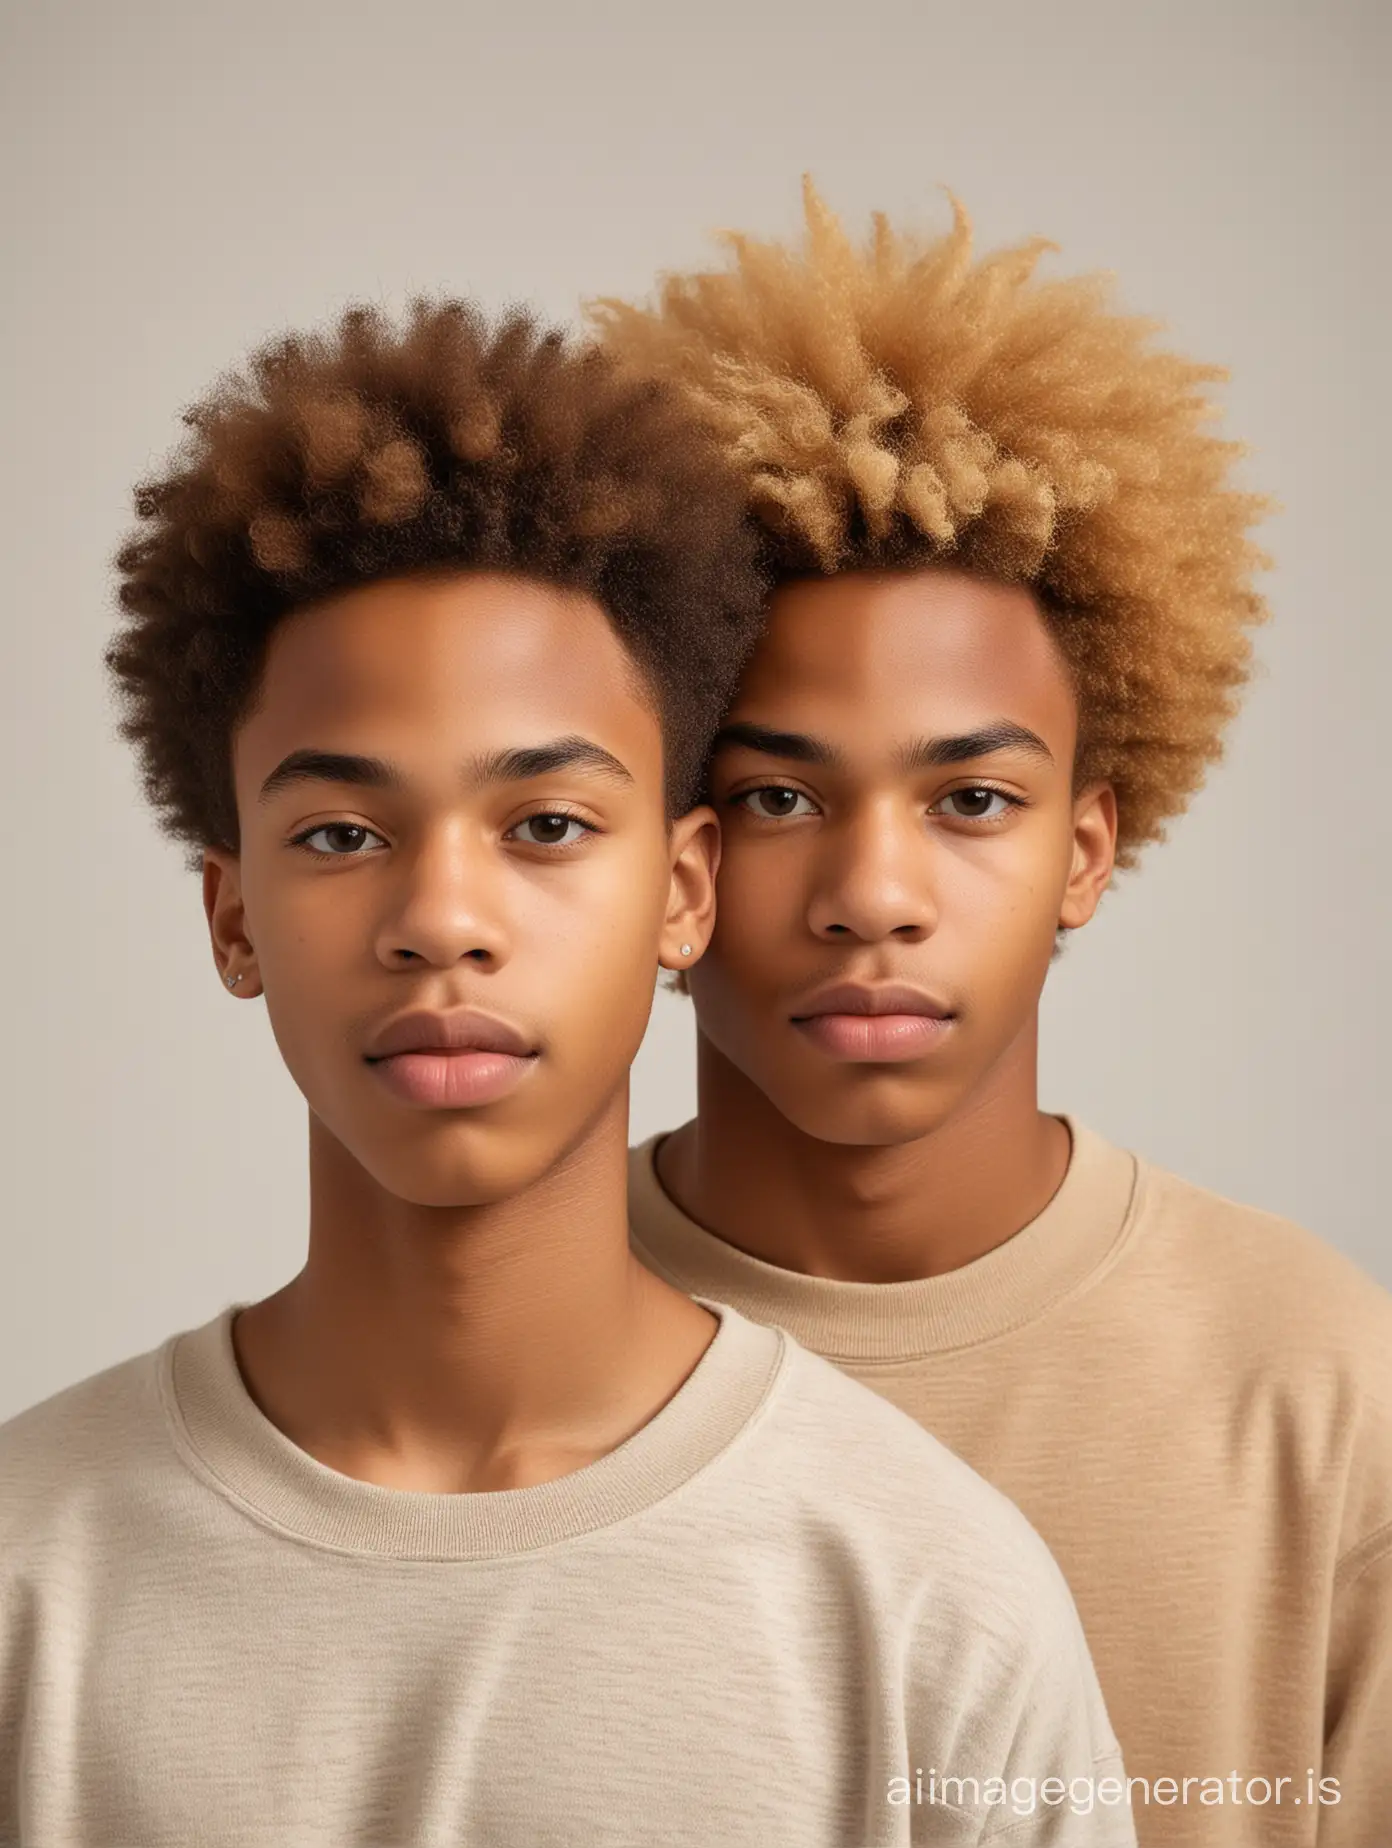 Portrait-of-Black-Teenage-Brothers-with-Natural-Blonde-Afro-Hair-and-Pointy-Ears